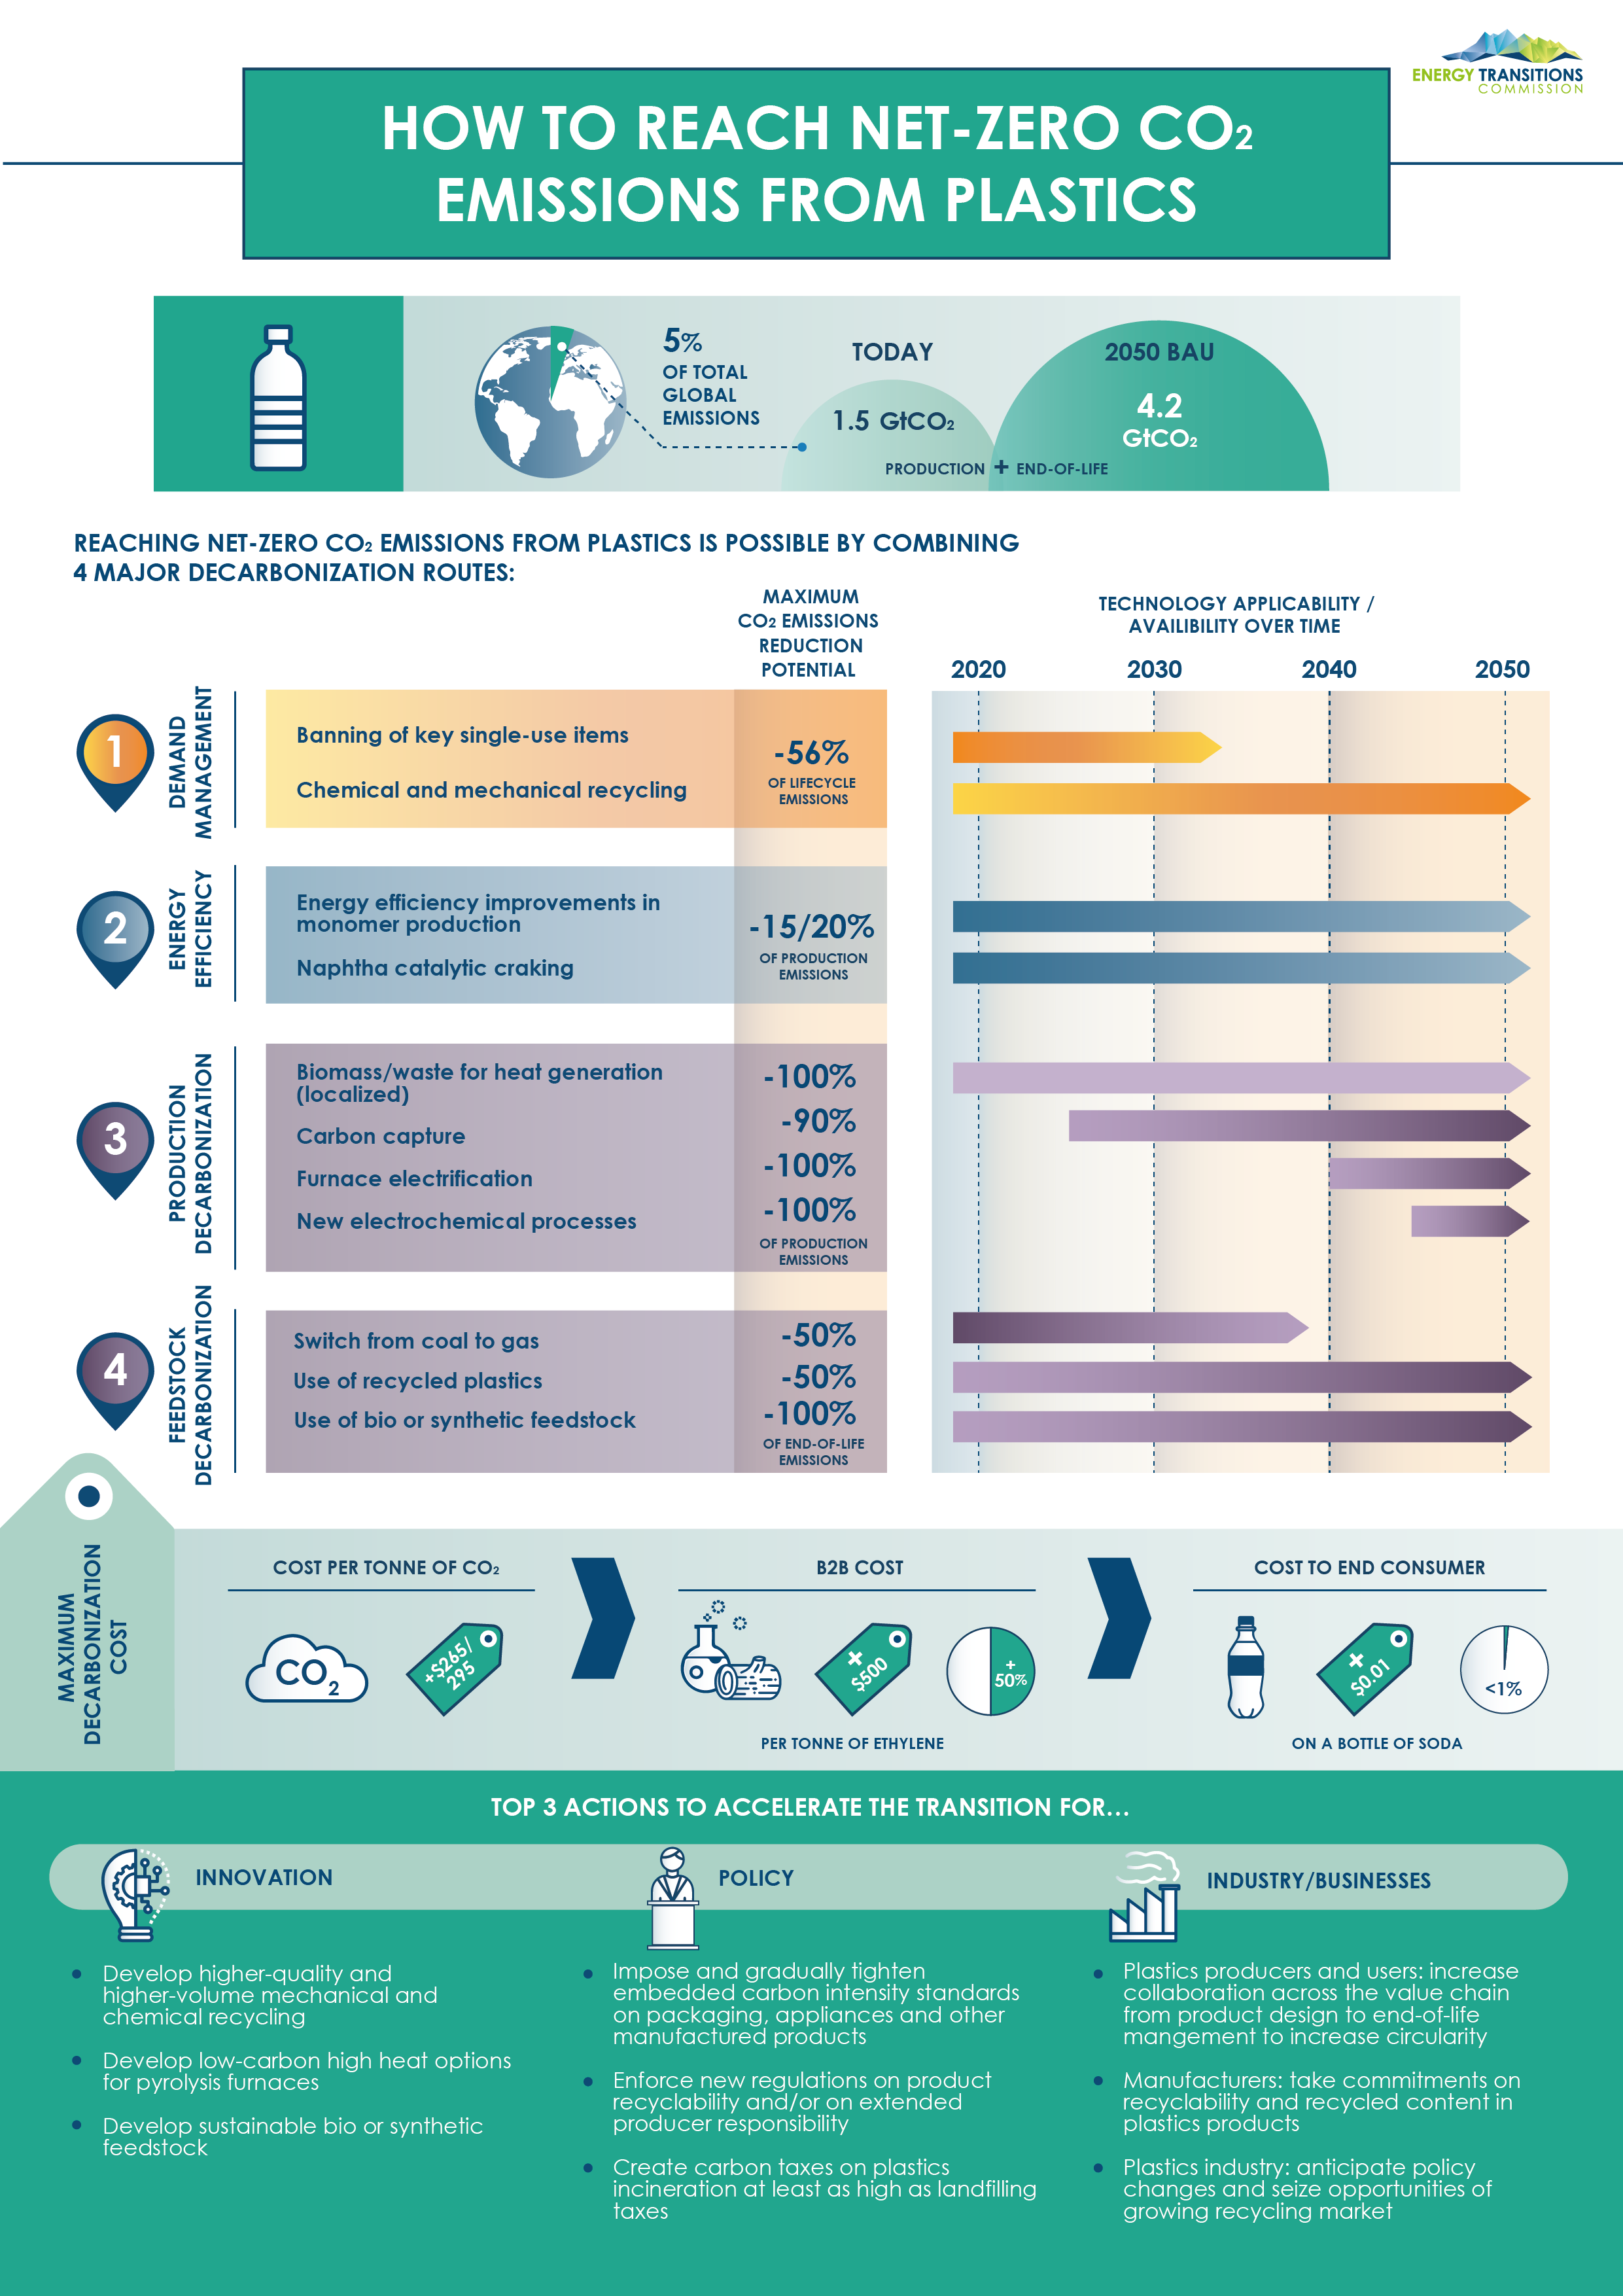 How To Reach Net-Zero CO2 Emissions From Plastics Infographic